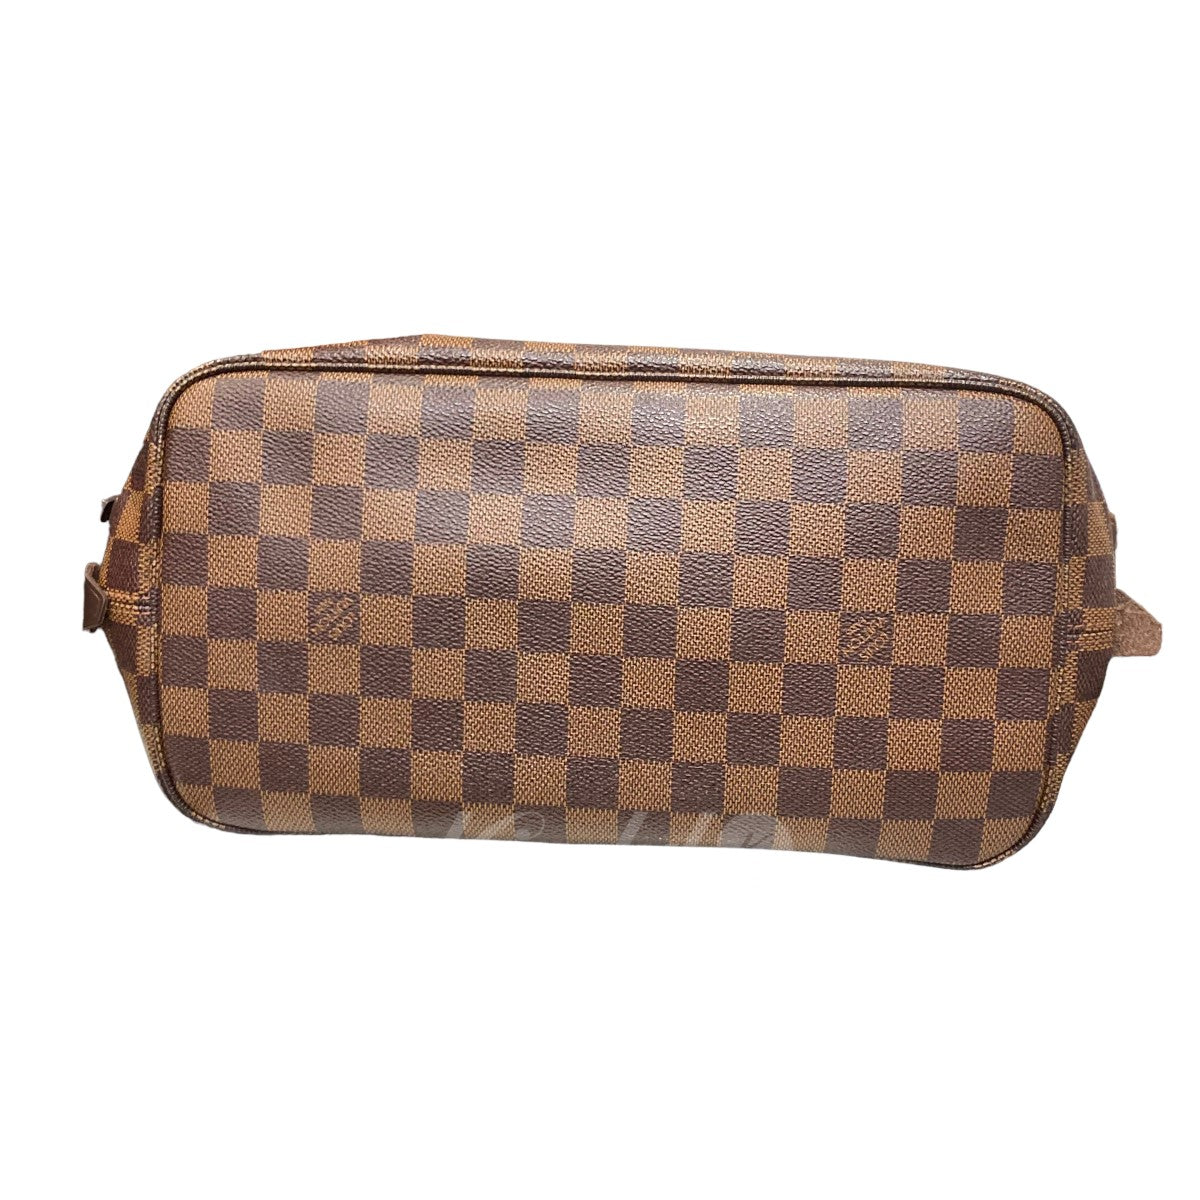 LOUIS VUITTON(ルイヴィトン) N41108「ダミエ カバ・リヴィントン ...